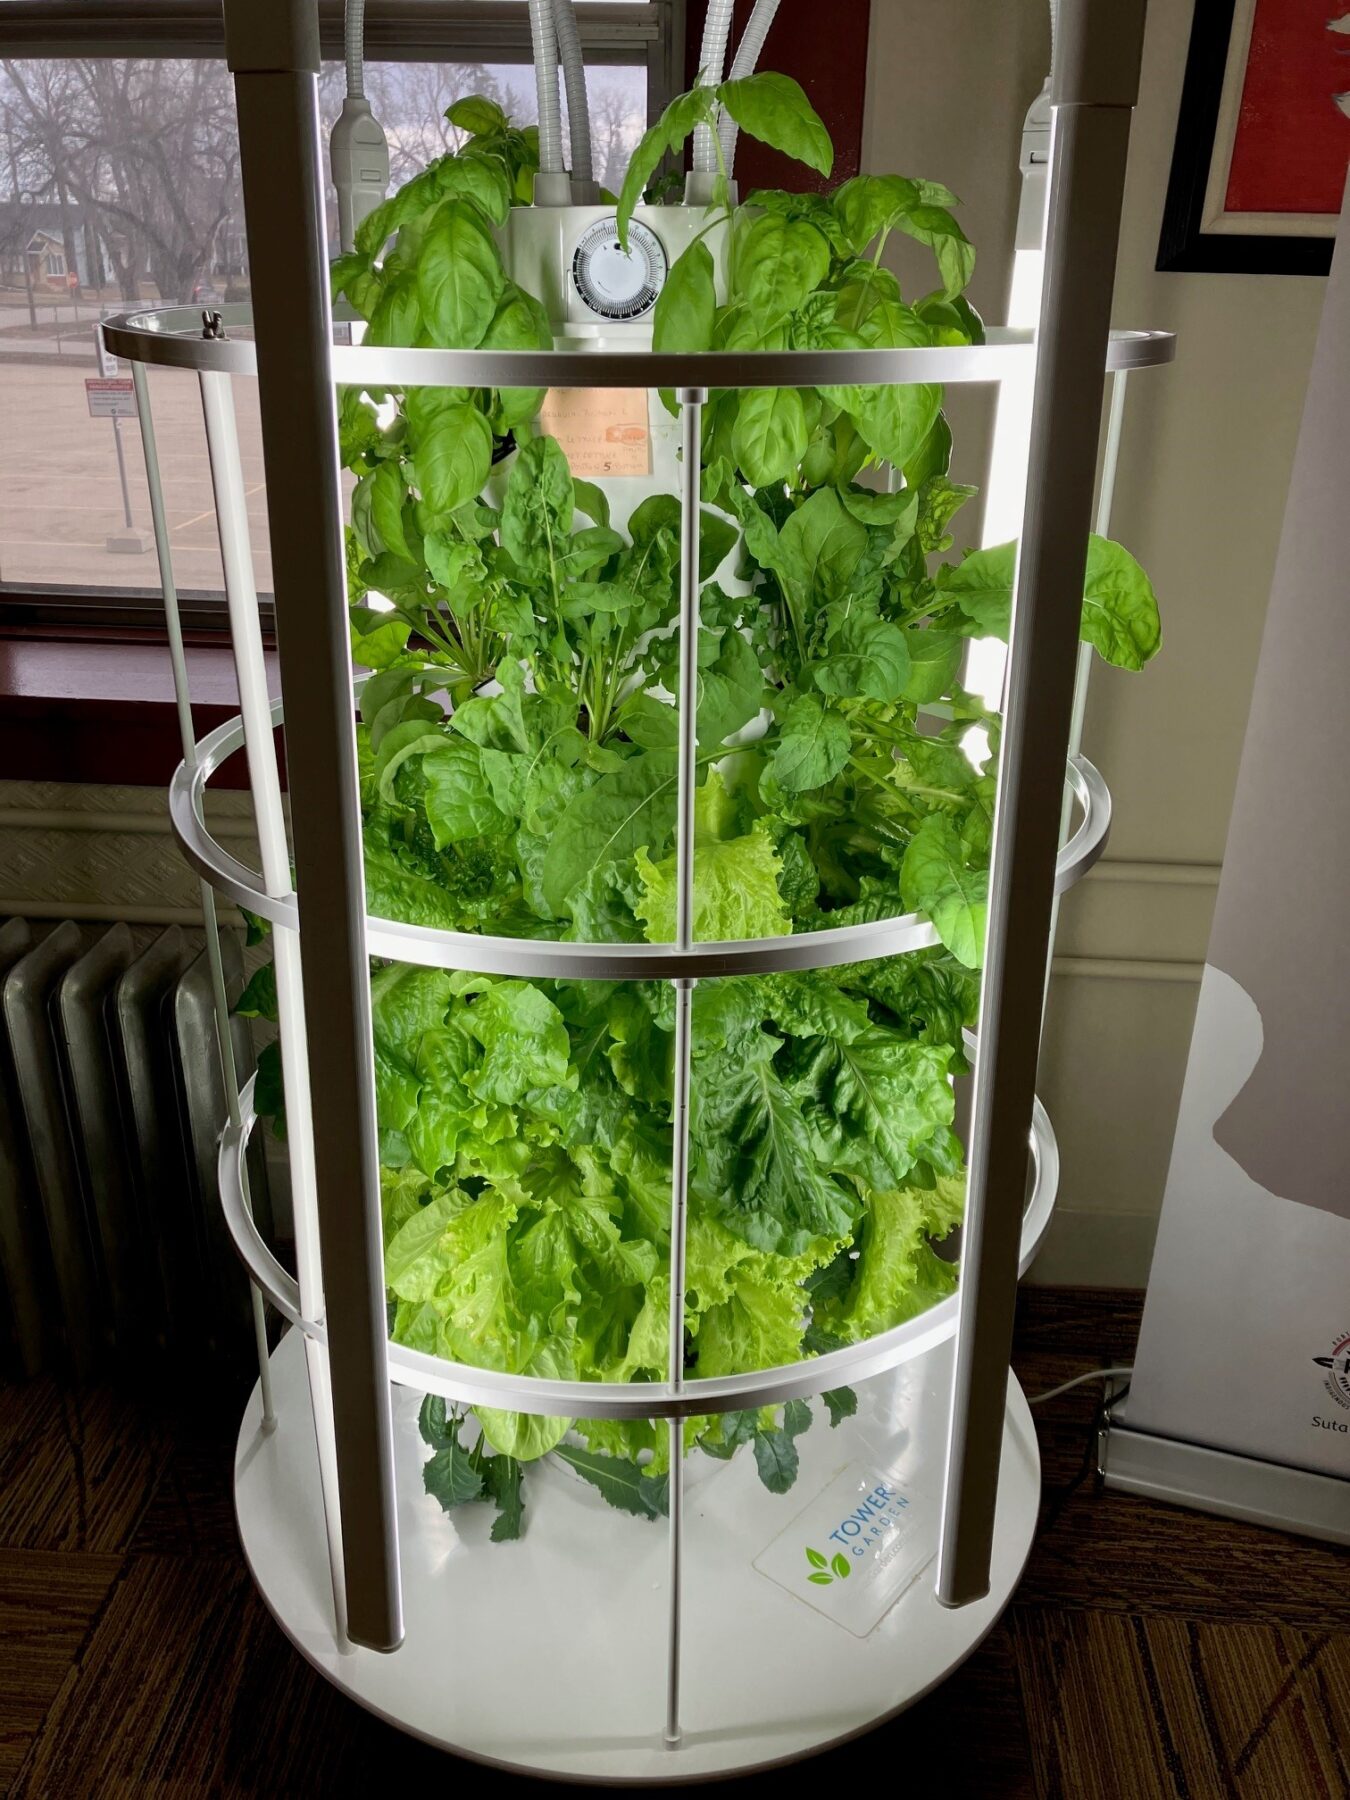 Hydroponic garden with bright green lettuce, basil and arugula growing out of it. The garden stands in front of a window and has four lights attached at its sides.